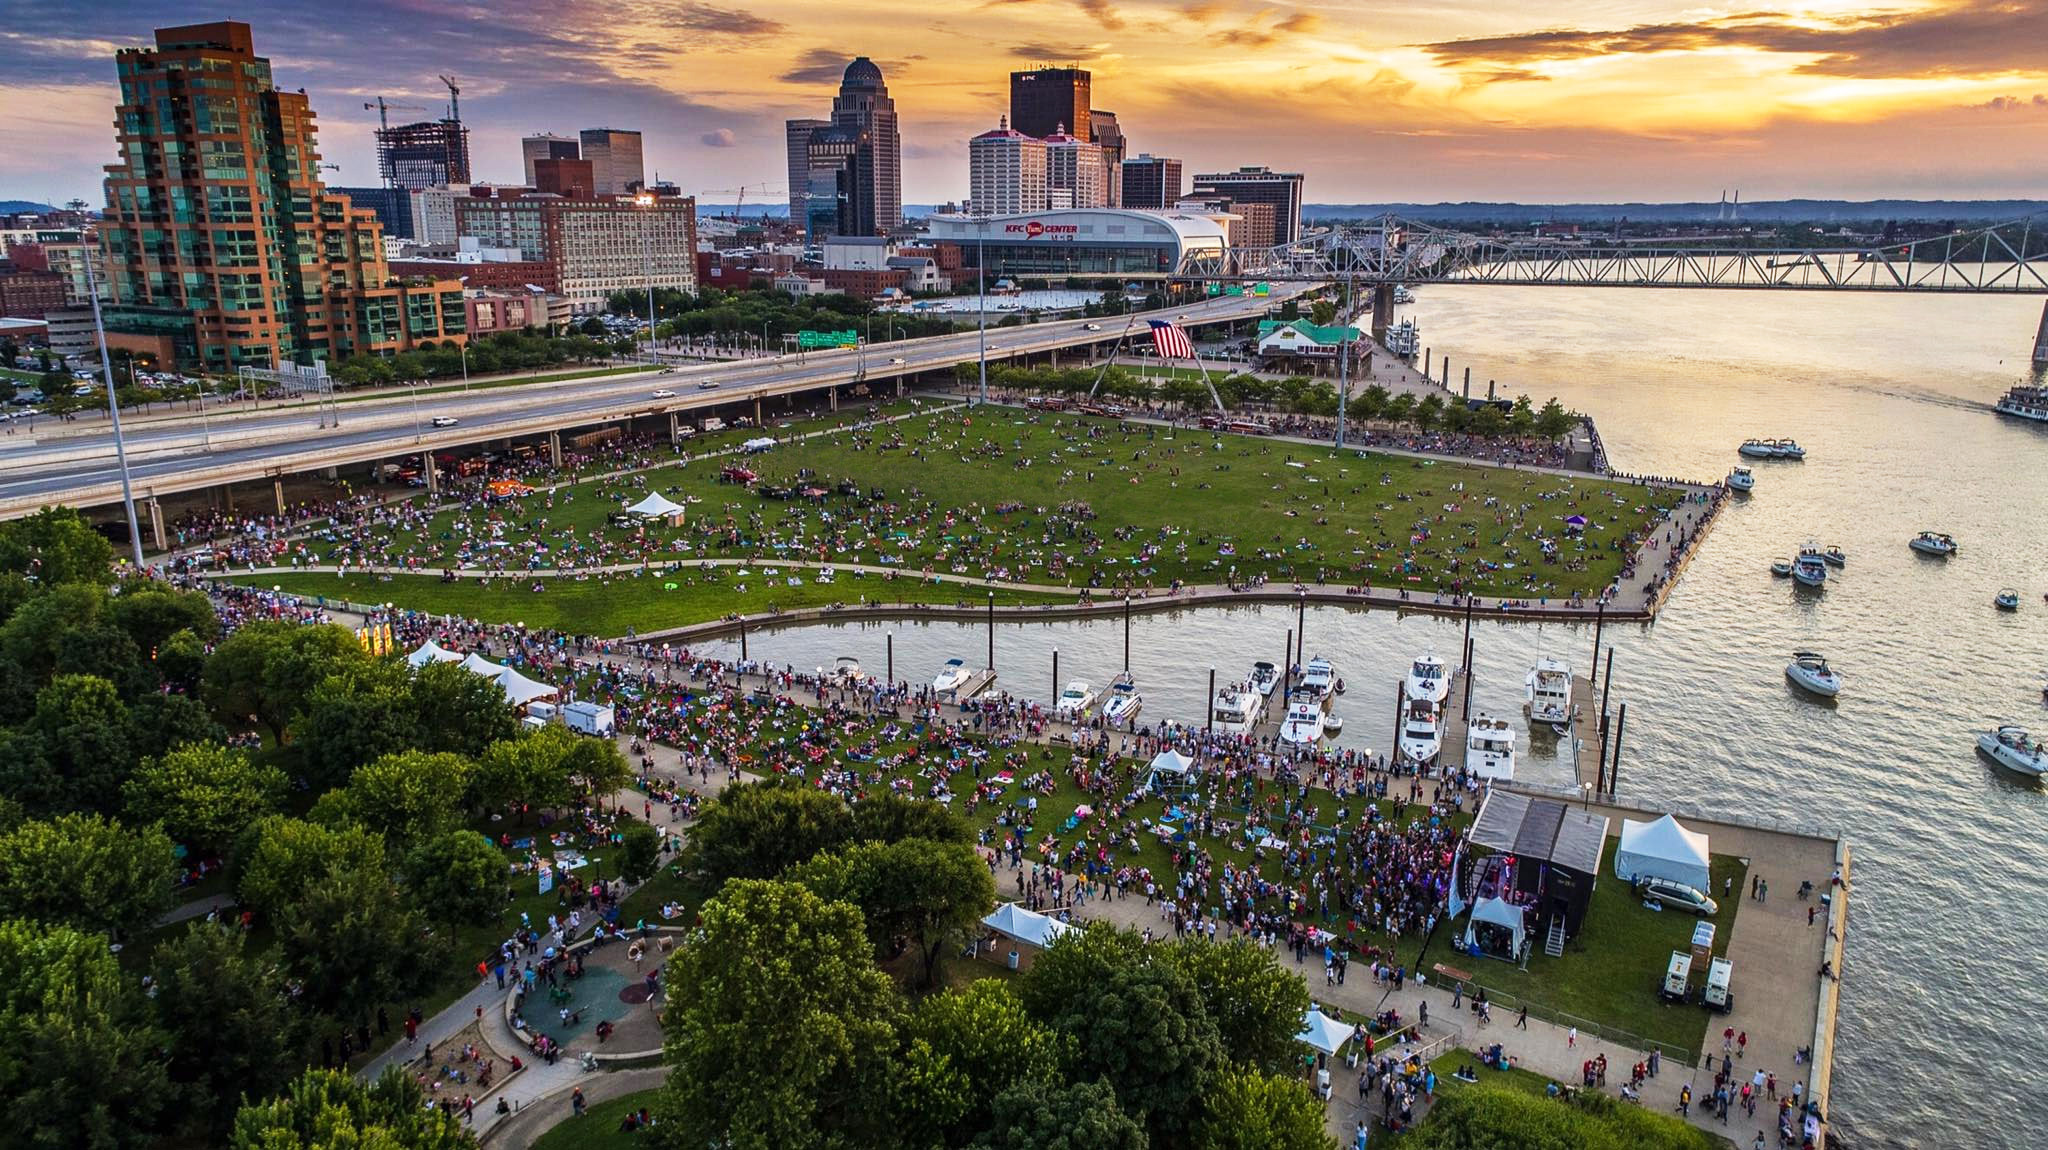 Louisville Waterfront Park – Kentucky (United States of America